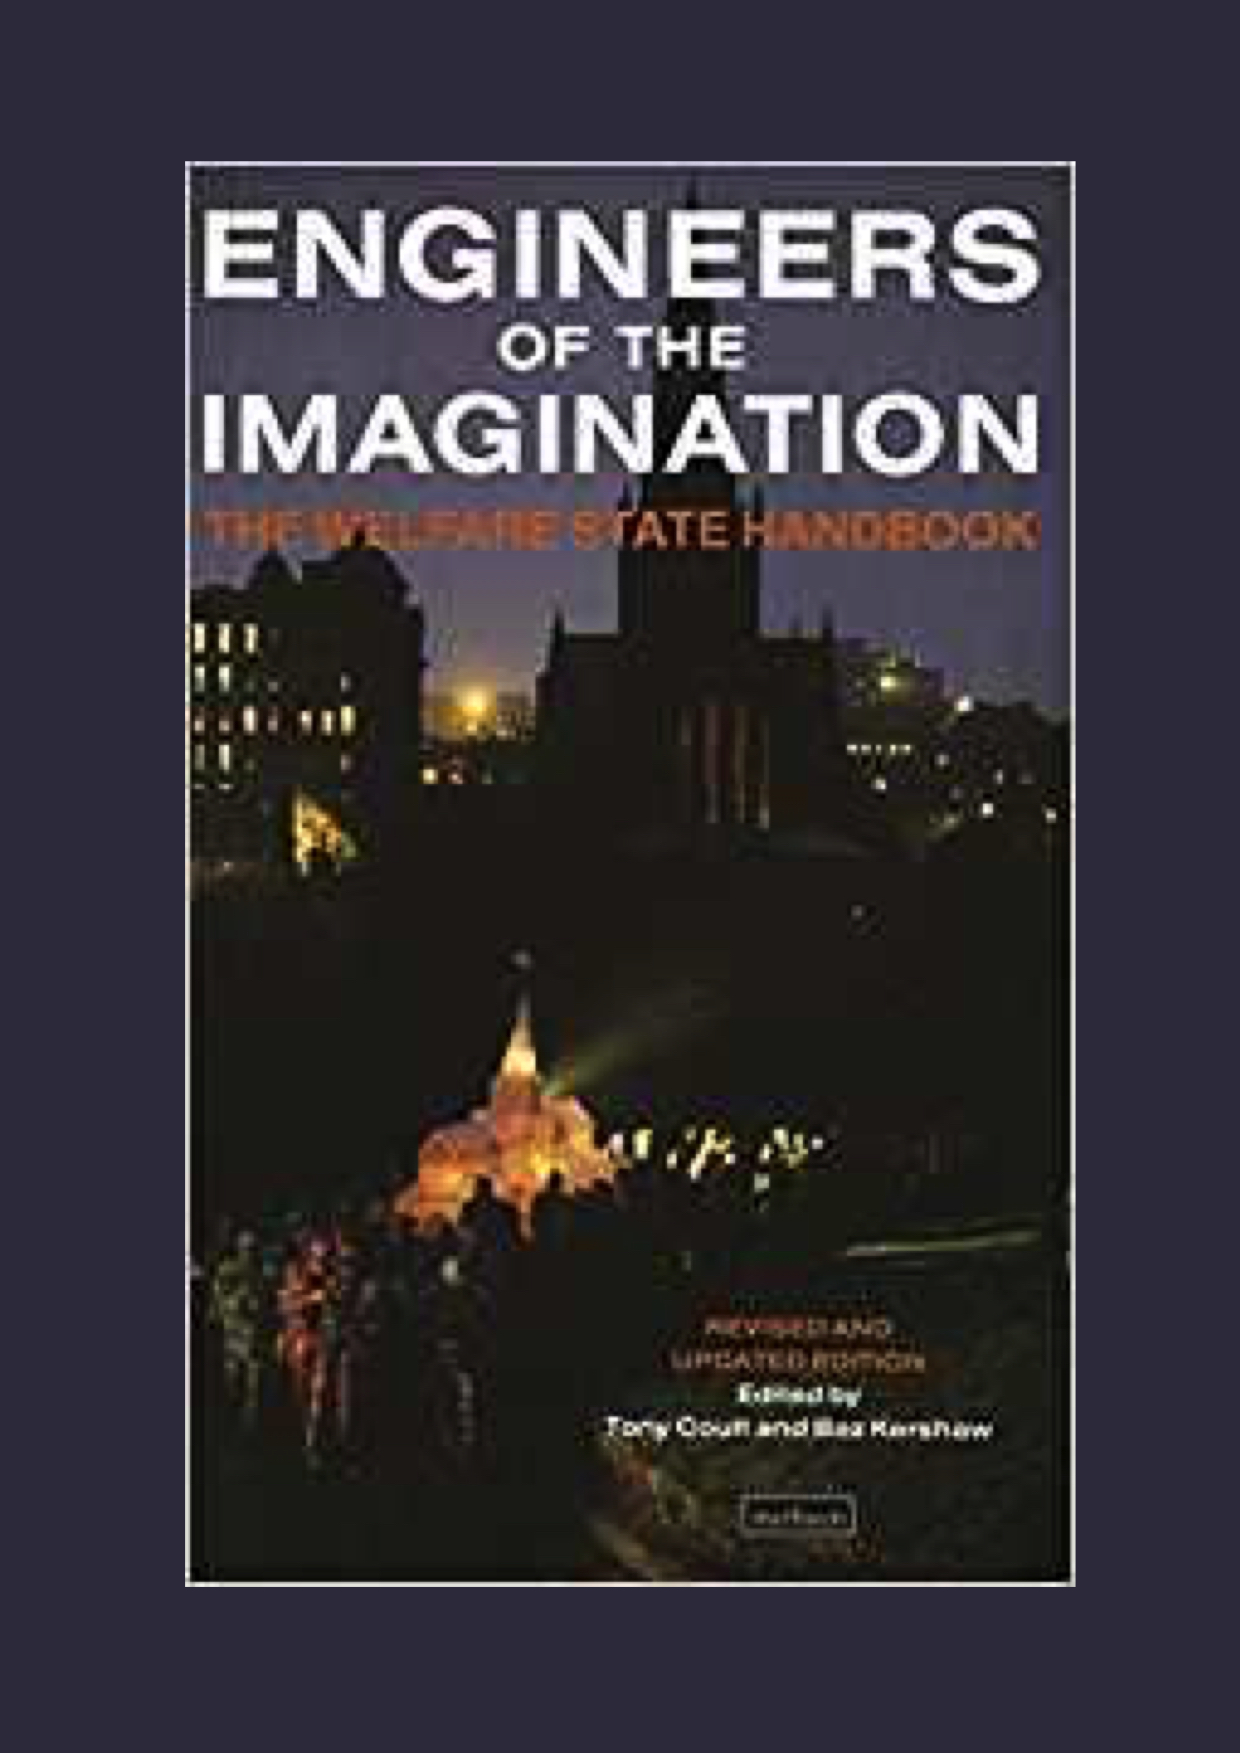 "Engineers of the Imagination: The Welfare State Handbook" edited by Tony Coult and Baz Kershaw. Coverart is a long shot of a procession through a city. In the shadow of a Catherdral, a large group of people in extravagant suits walk with a white model of the cathedral glowing with yellow light.